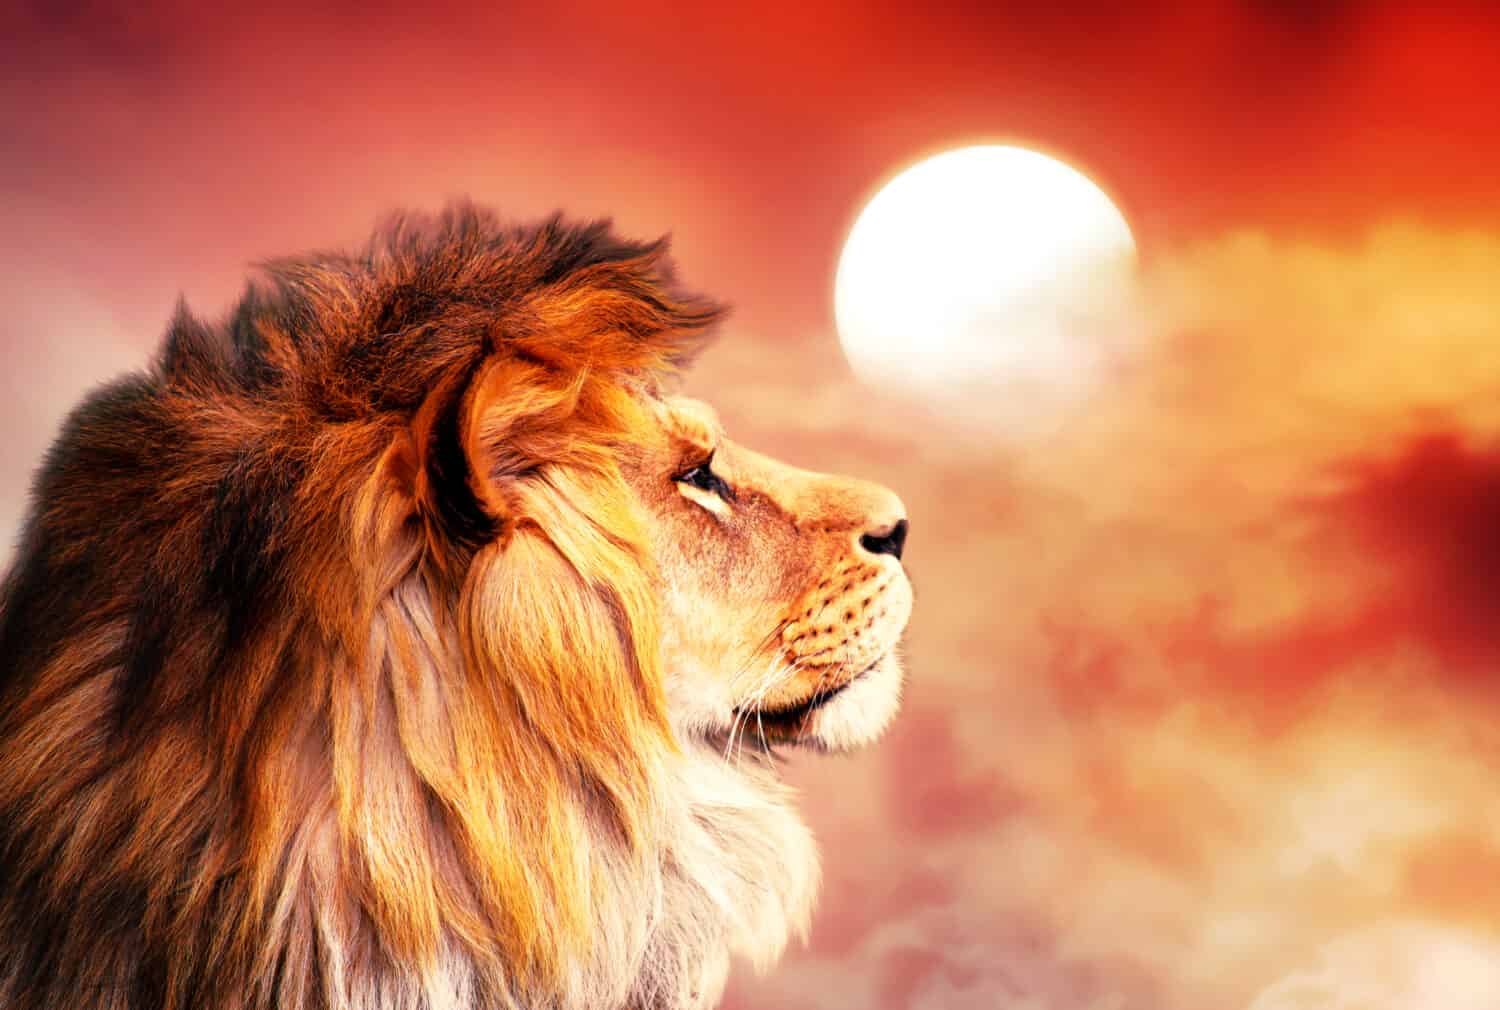 African lion and sunset in Africa. African savannah landscape theme, king of animals. Proud dreaming noble lion in savanna looking to sky. Amazing warm sun light and blazing red cloudy sky.